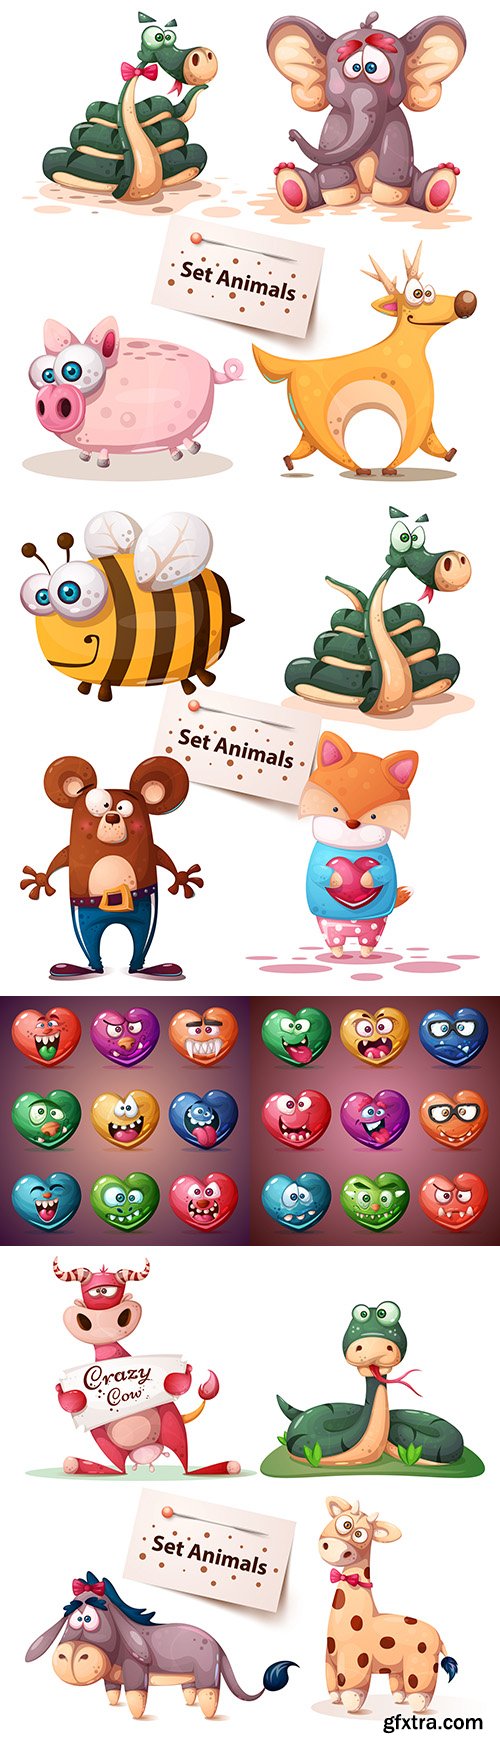 Funny heart and funny set characters illustration